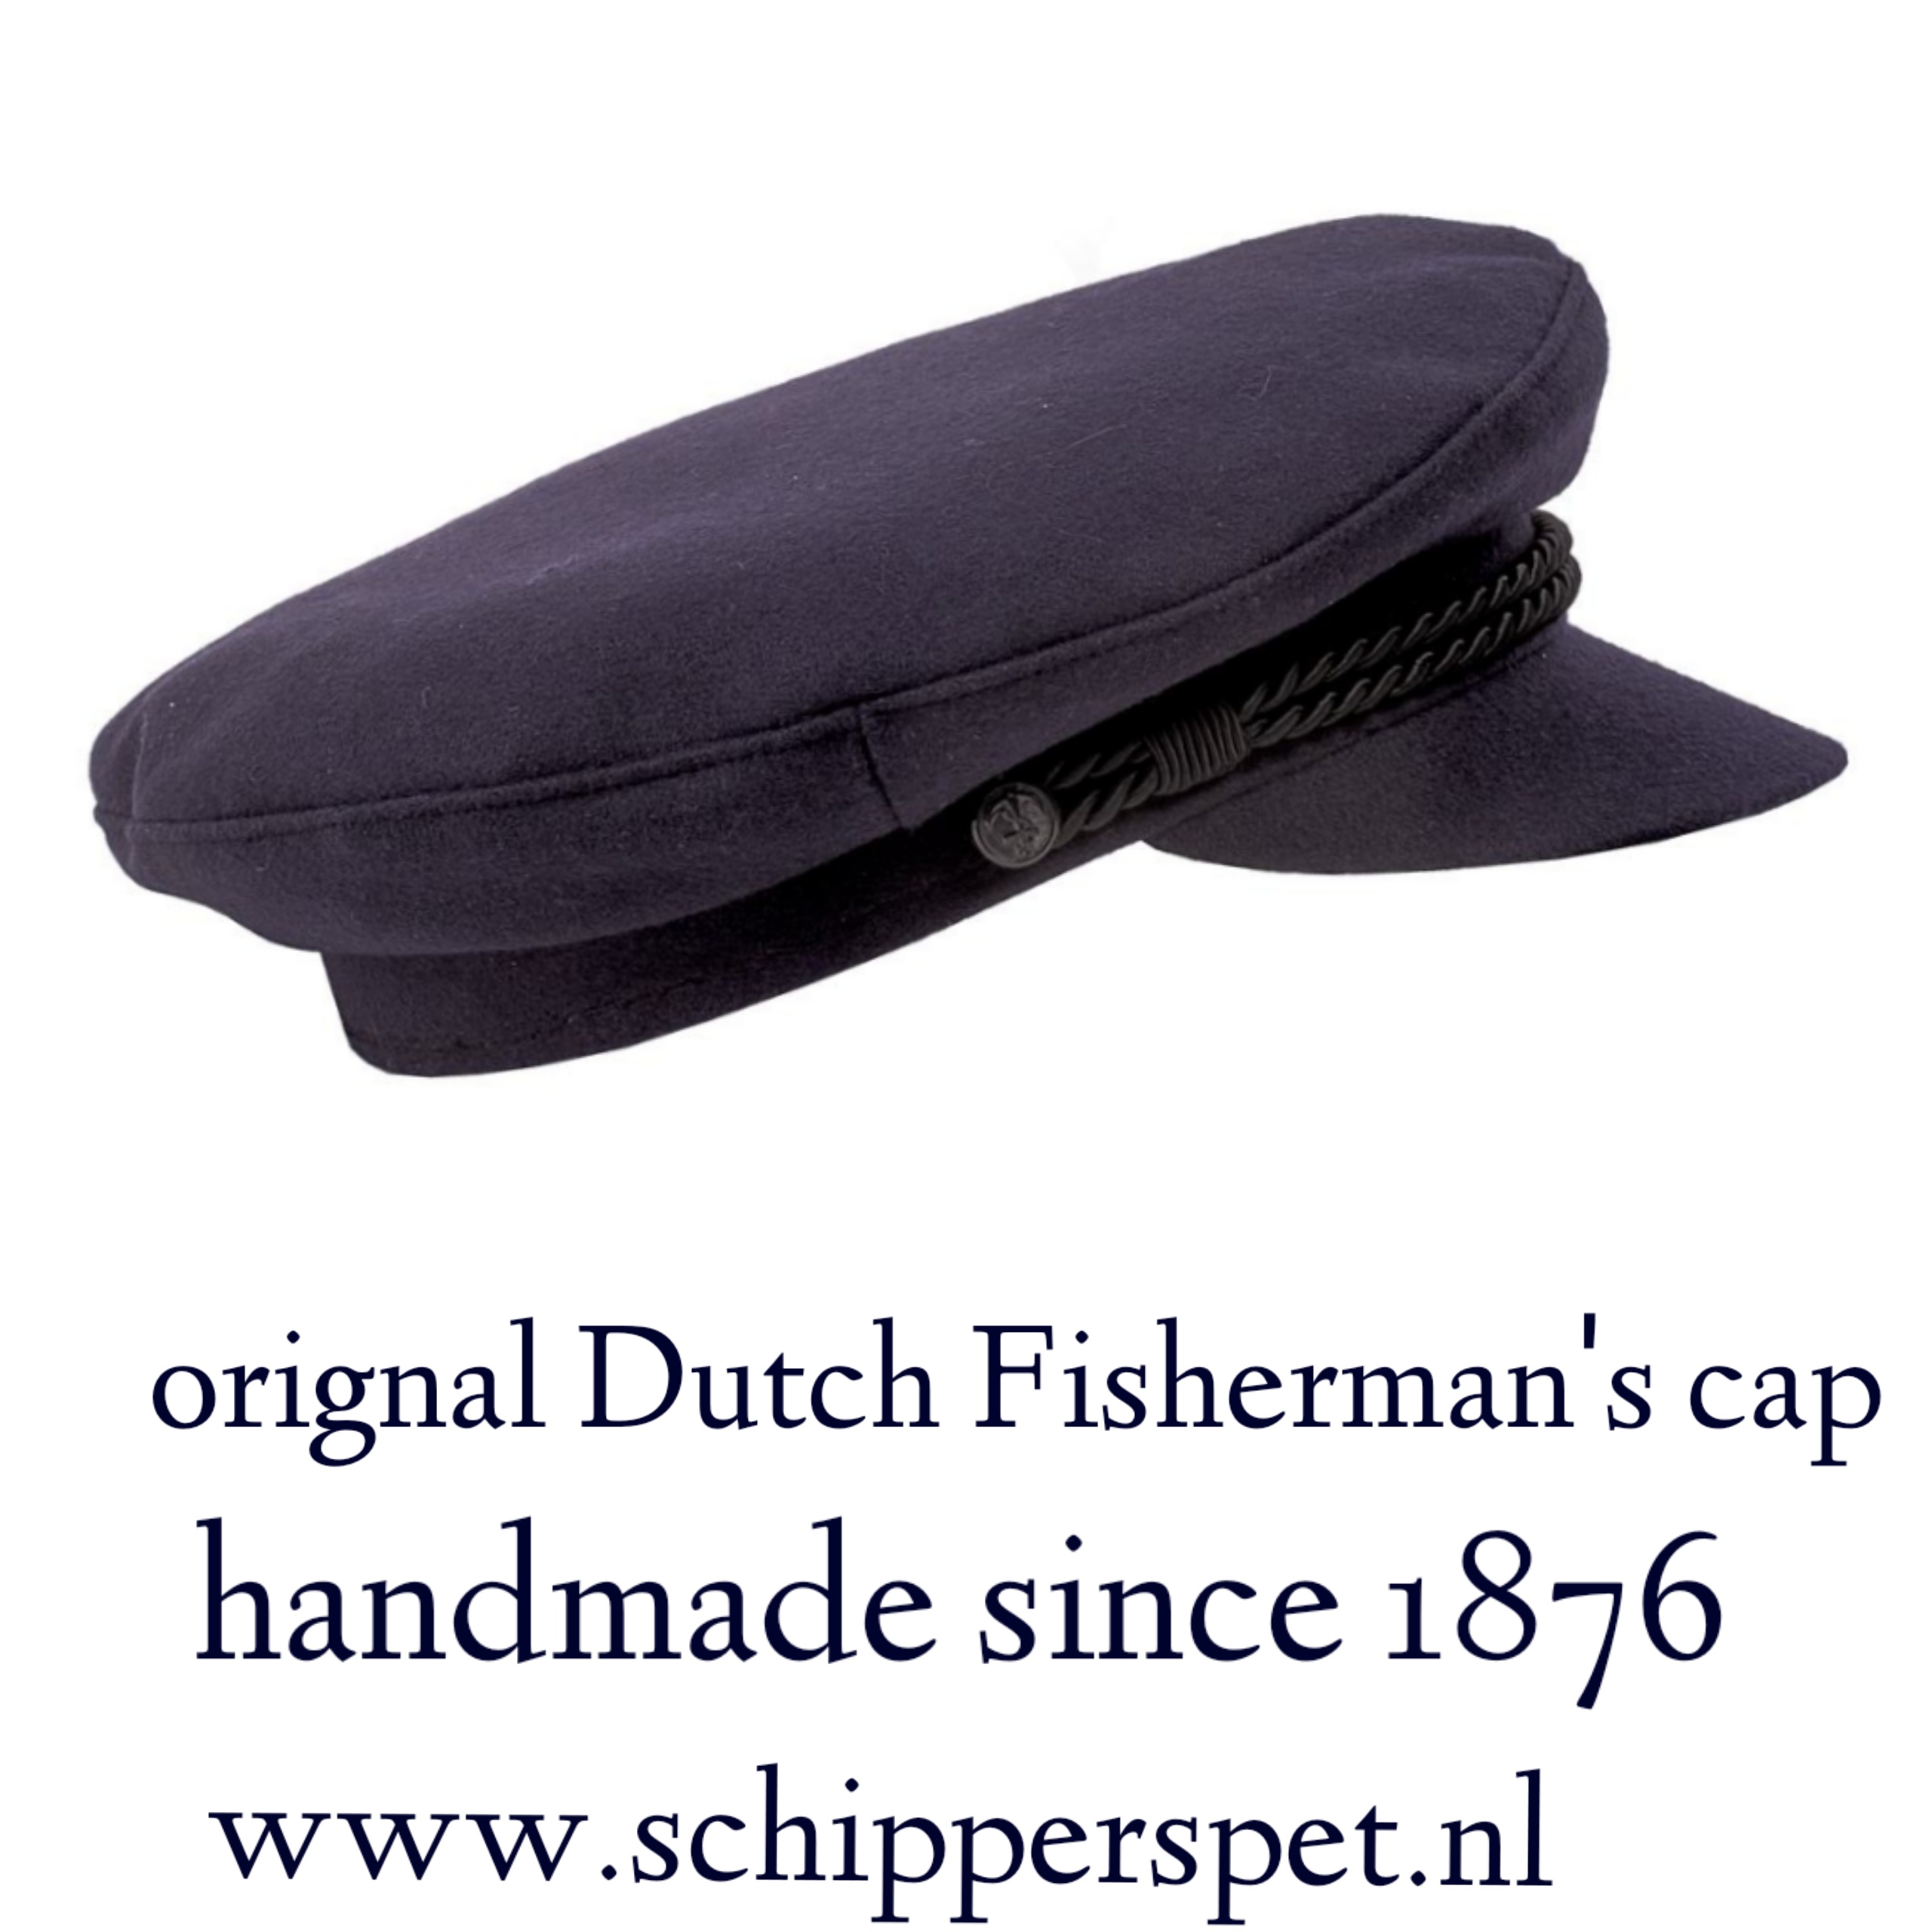 Schipperspet on X: This original, traditional and authentic Dutch